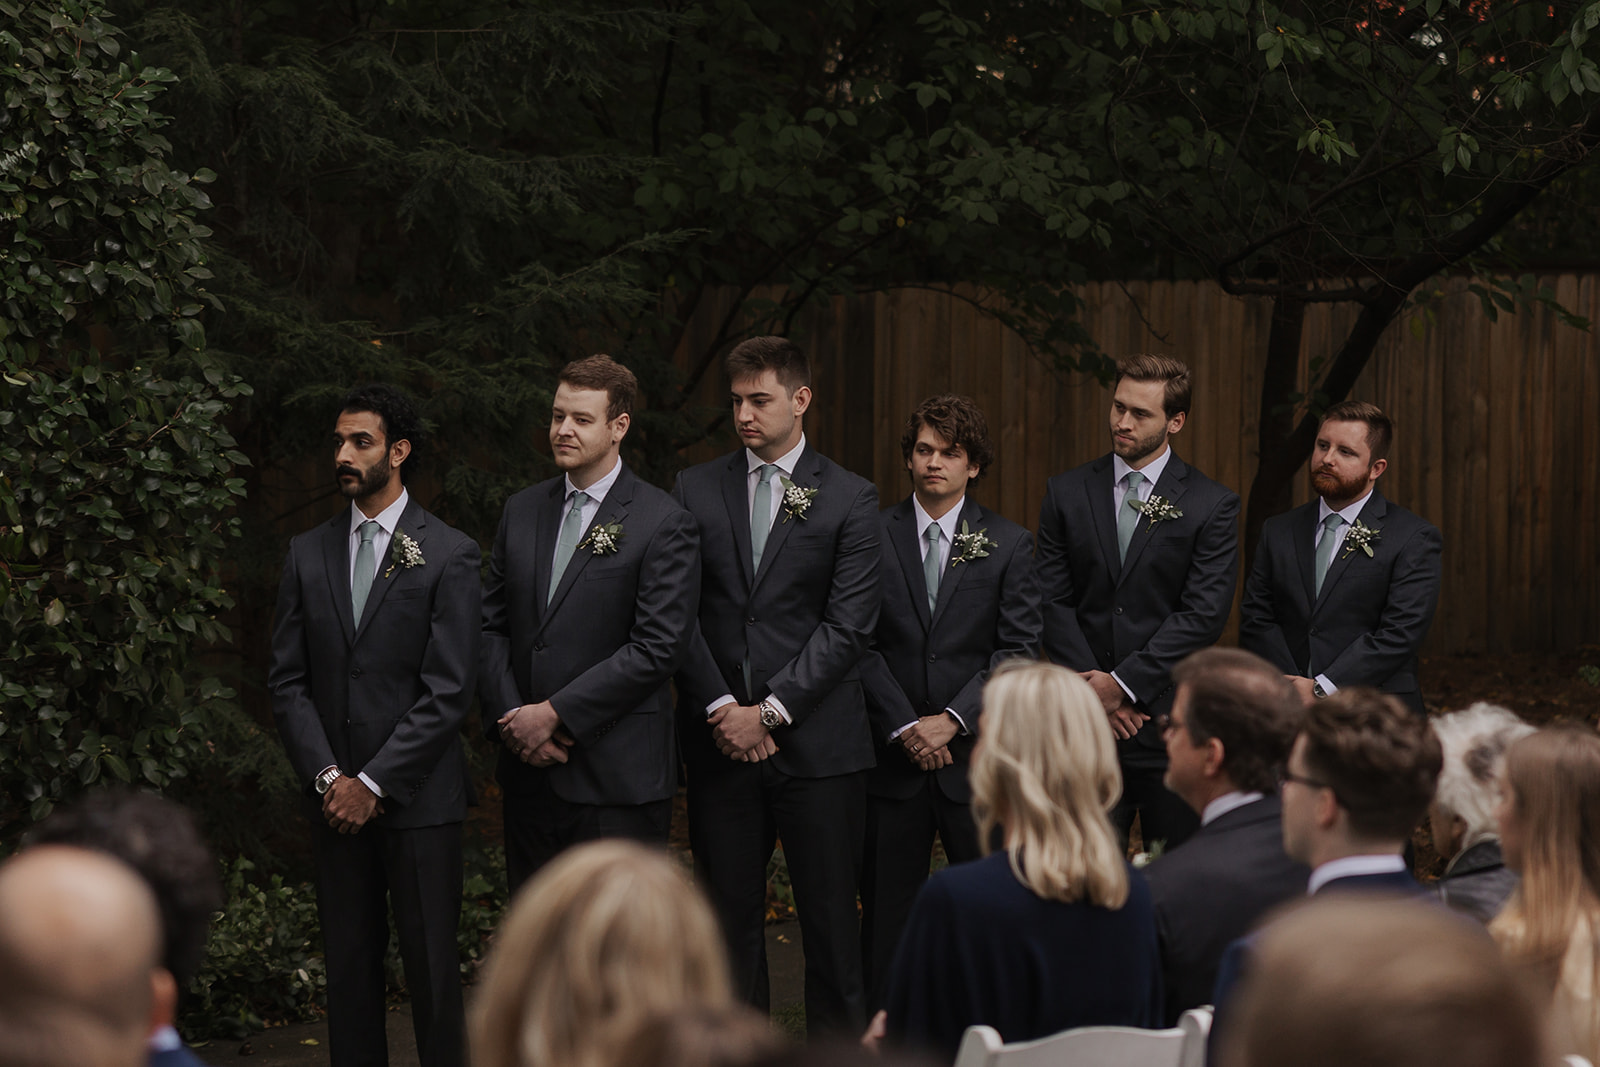 Groomsmen pose together at the alter before the dreamy Georgia wedding ceremony